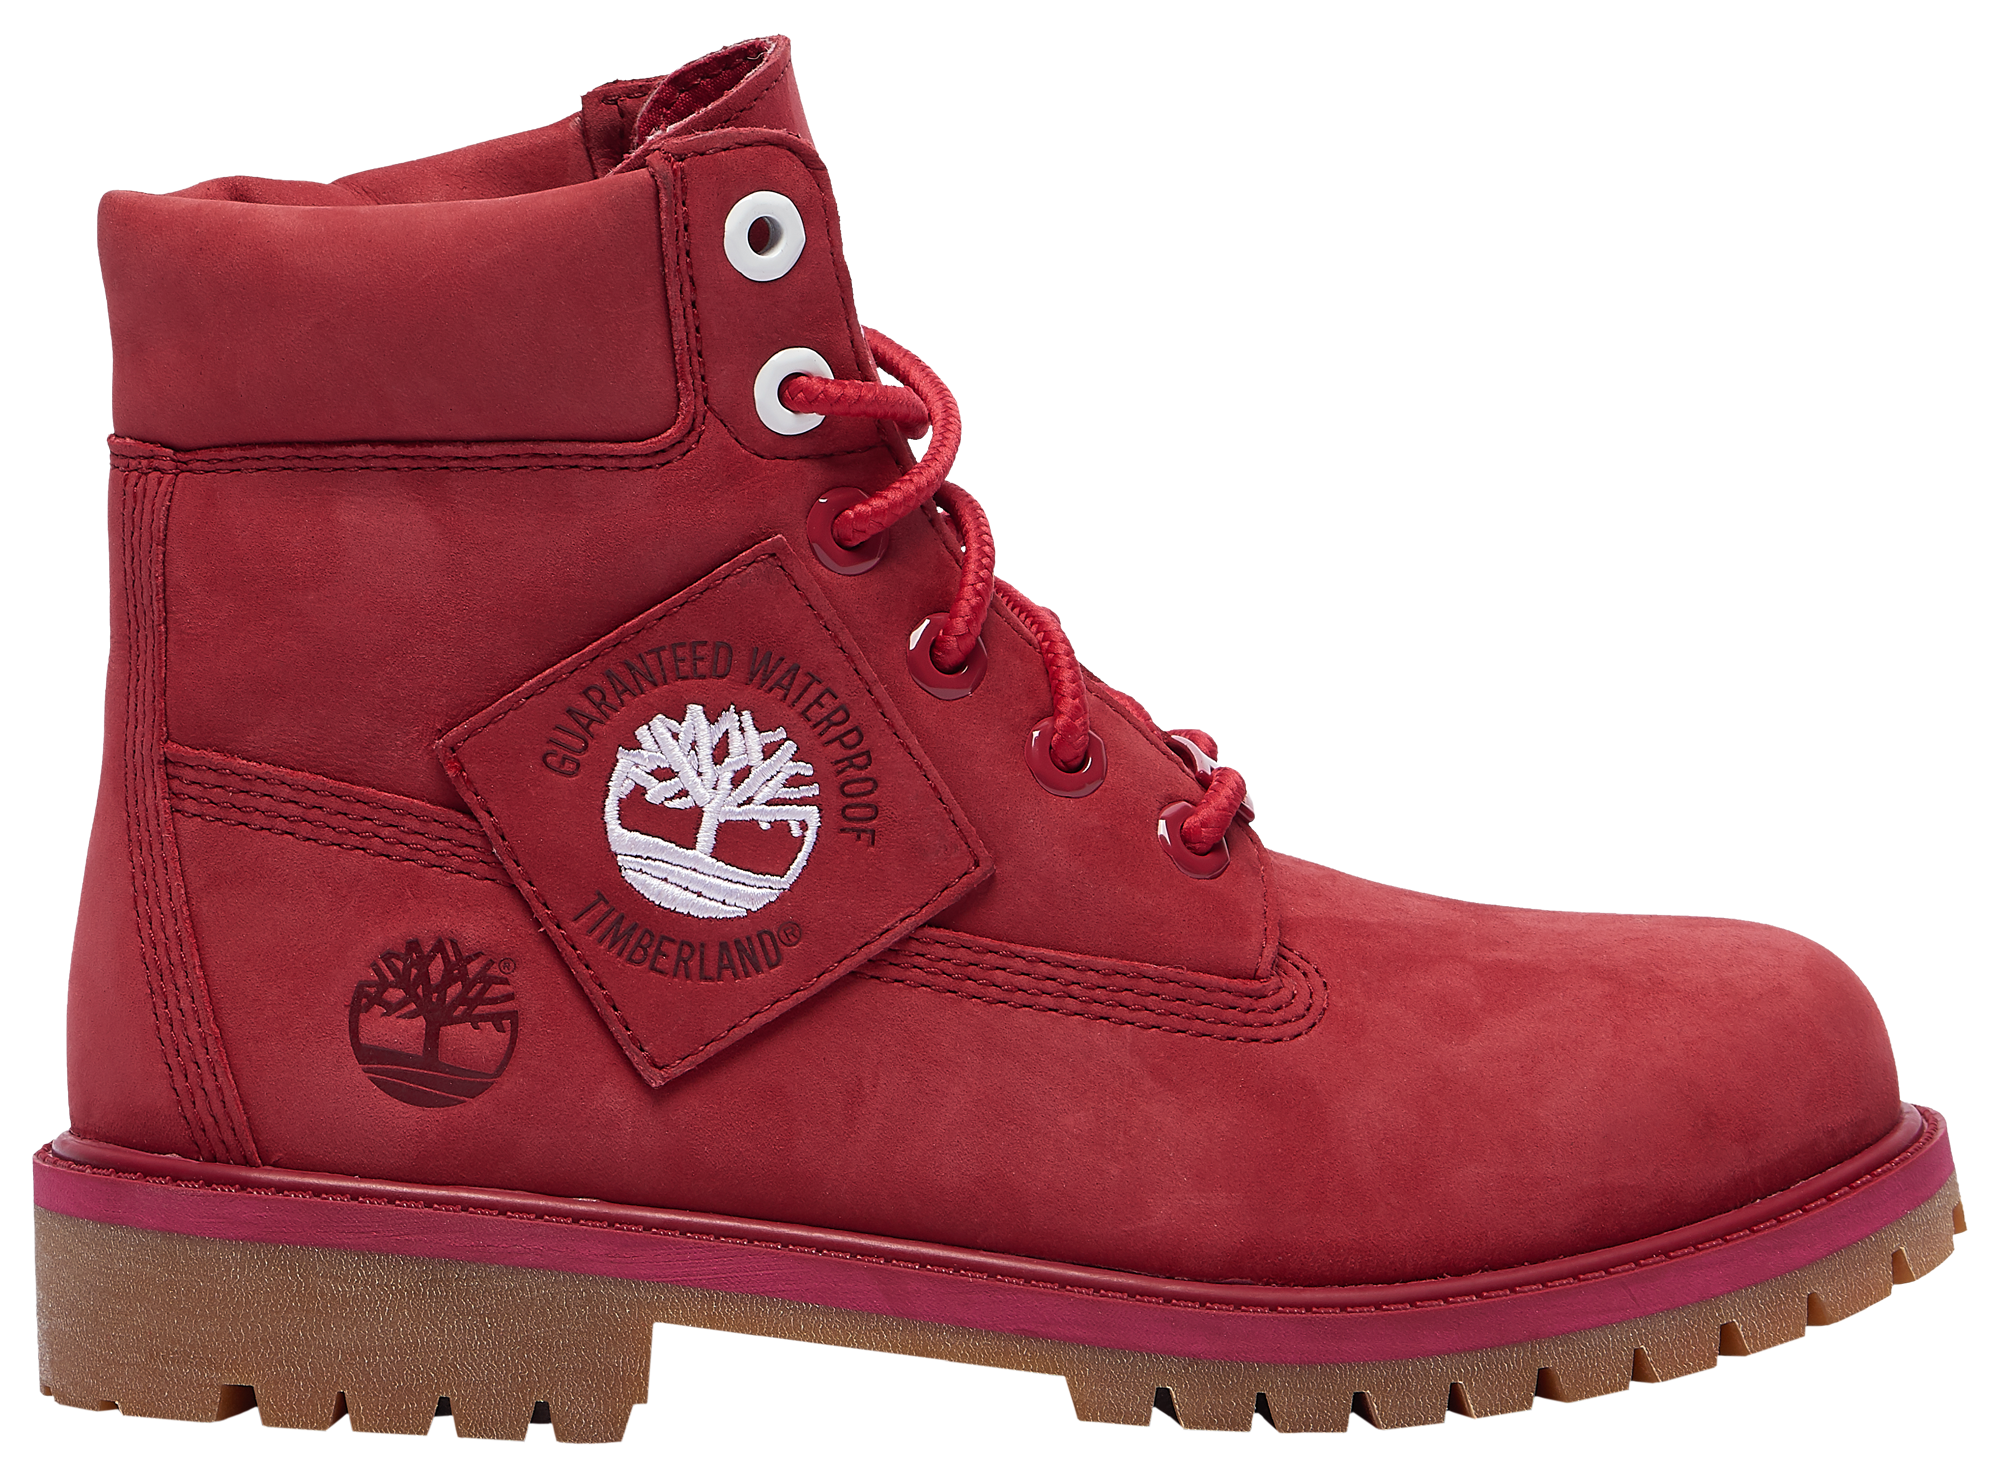 pink infant timberland boots